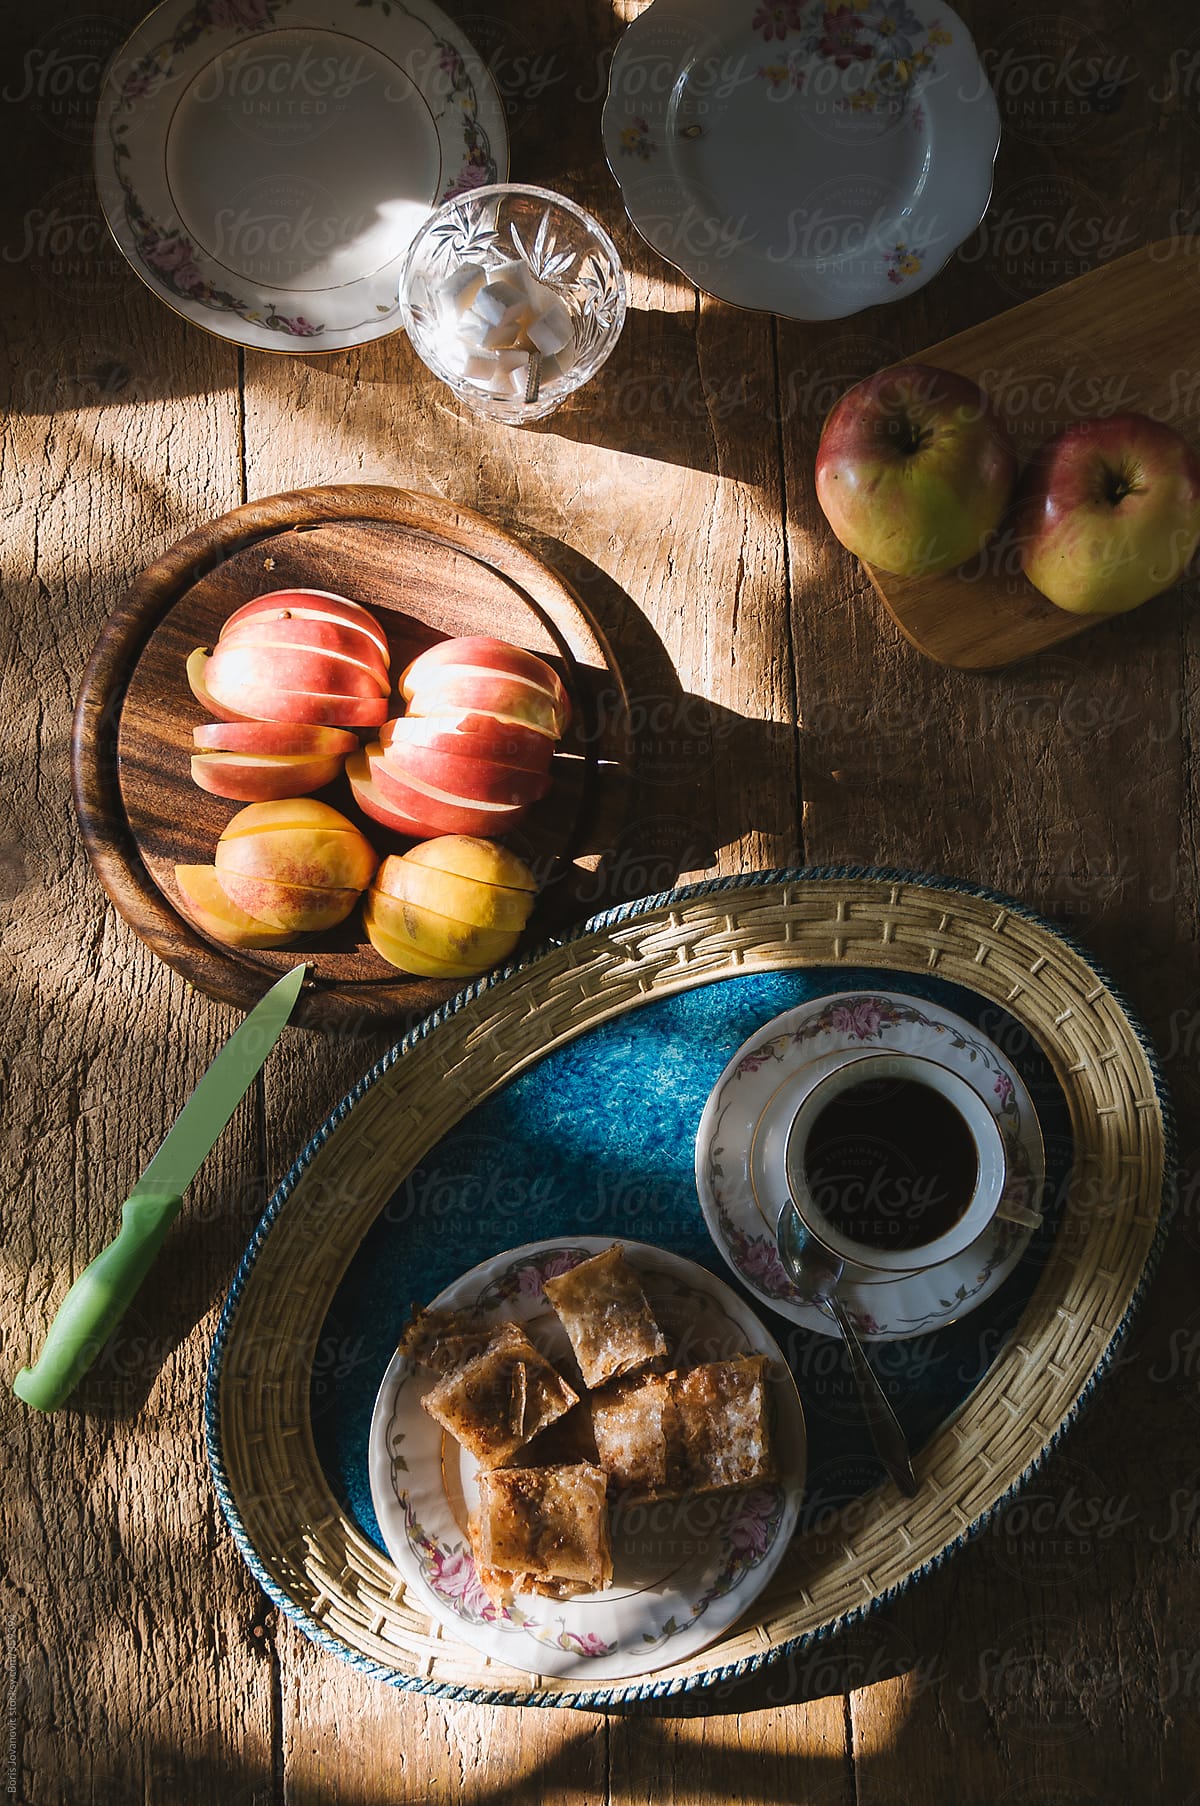 Fruits and sweets on wooden table